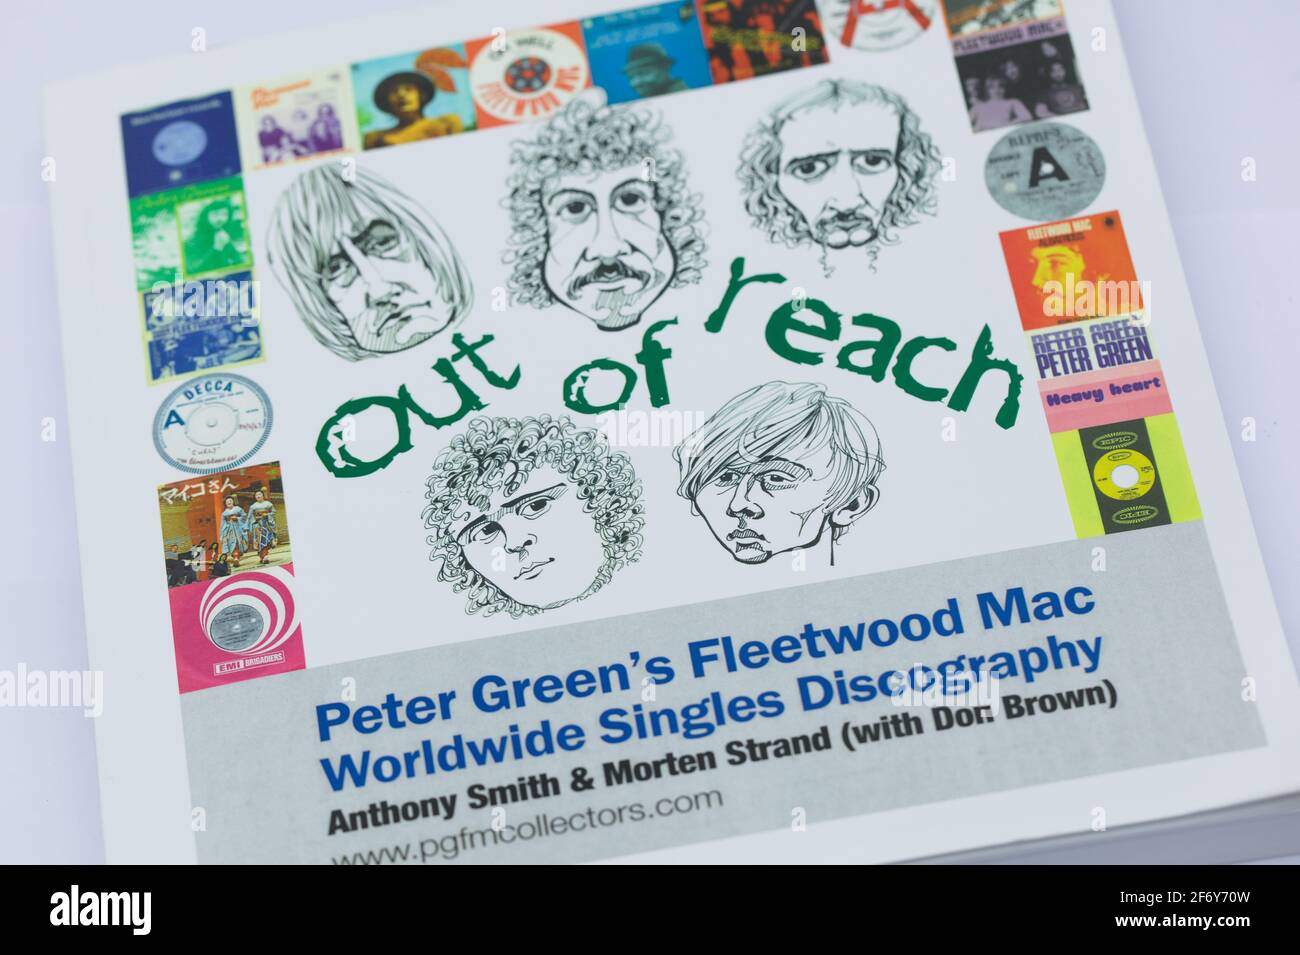 View of Out of Reach, Peter Green's Fleetwood Mac Worldwide Singles Discography book by Anthony Smith, Morten Strand on a white background Stock Photo